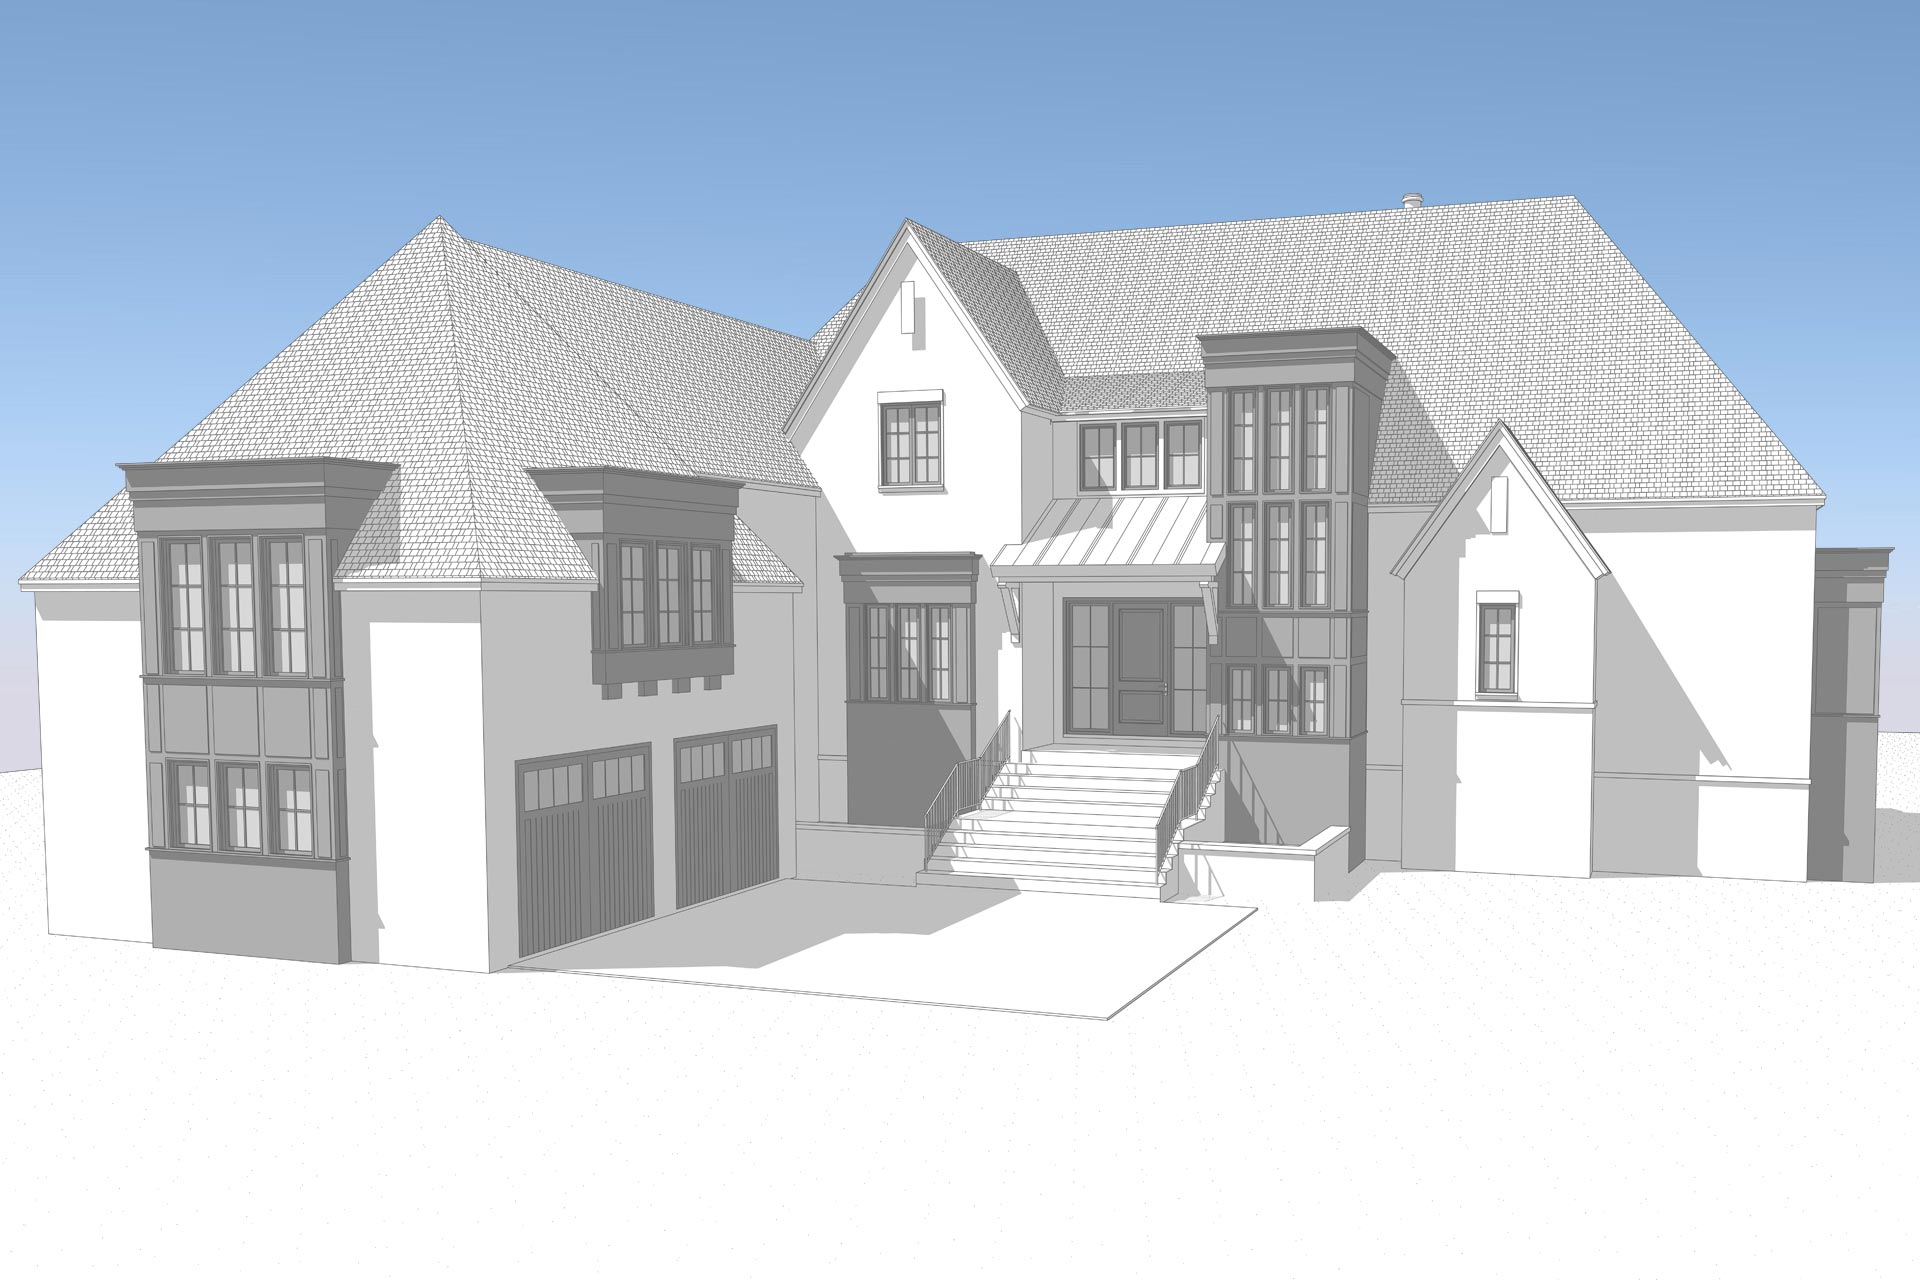 Design rendering for new home in Cassique on Kiawah Island designed by Swallowtail Architecture